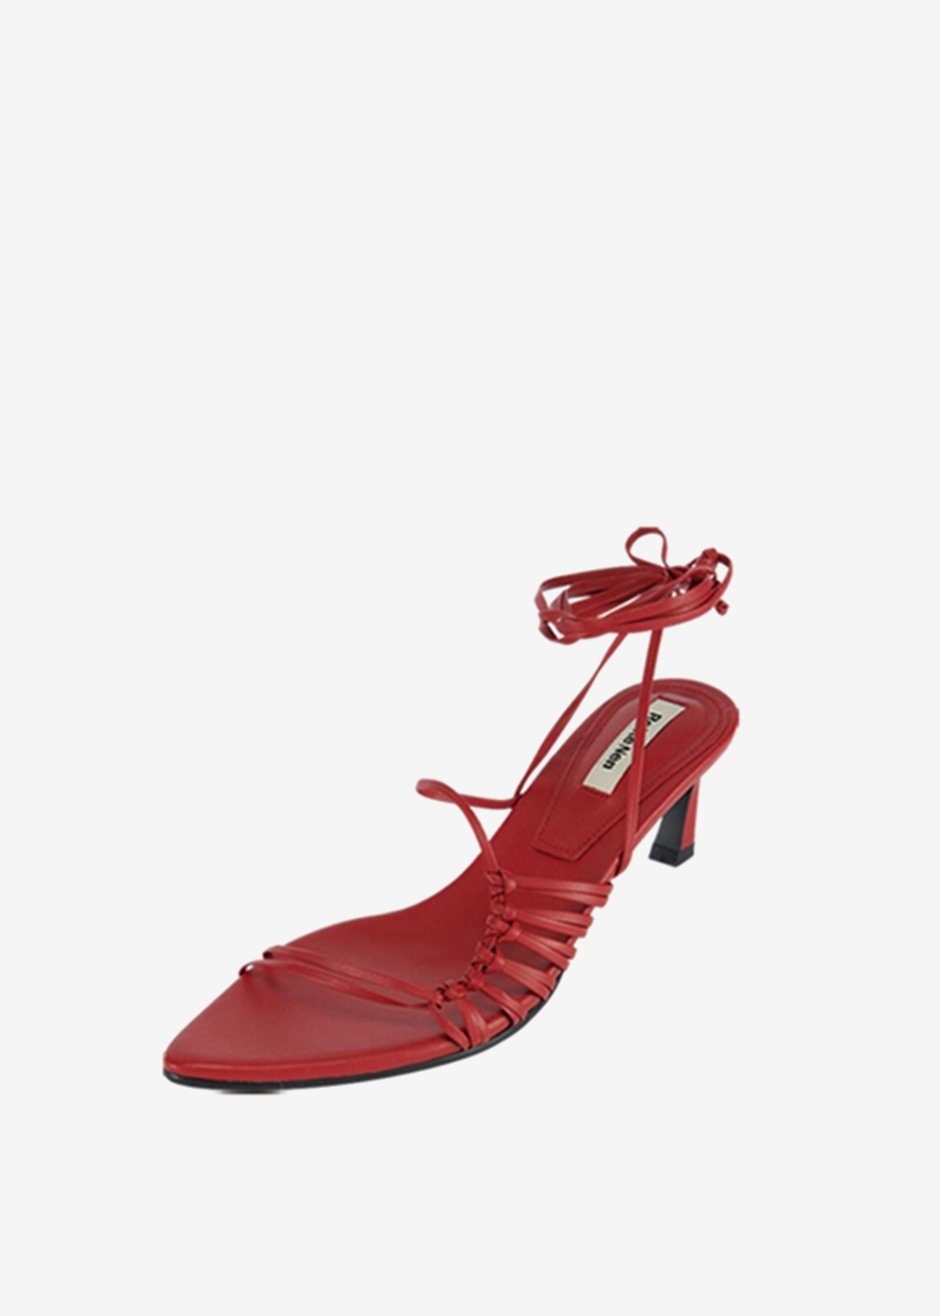 Reike Nen Pointy Lace-Up Sandals - Tomato Red - 3